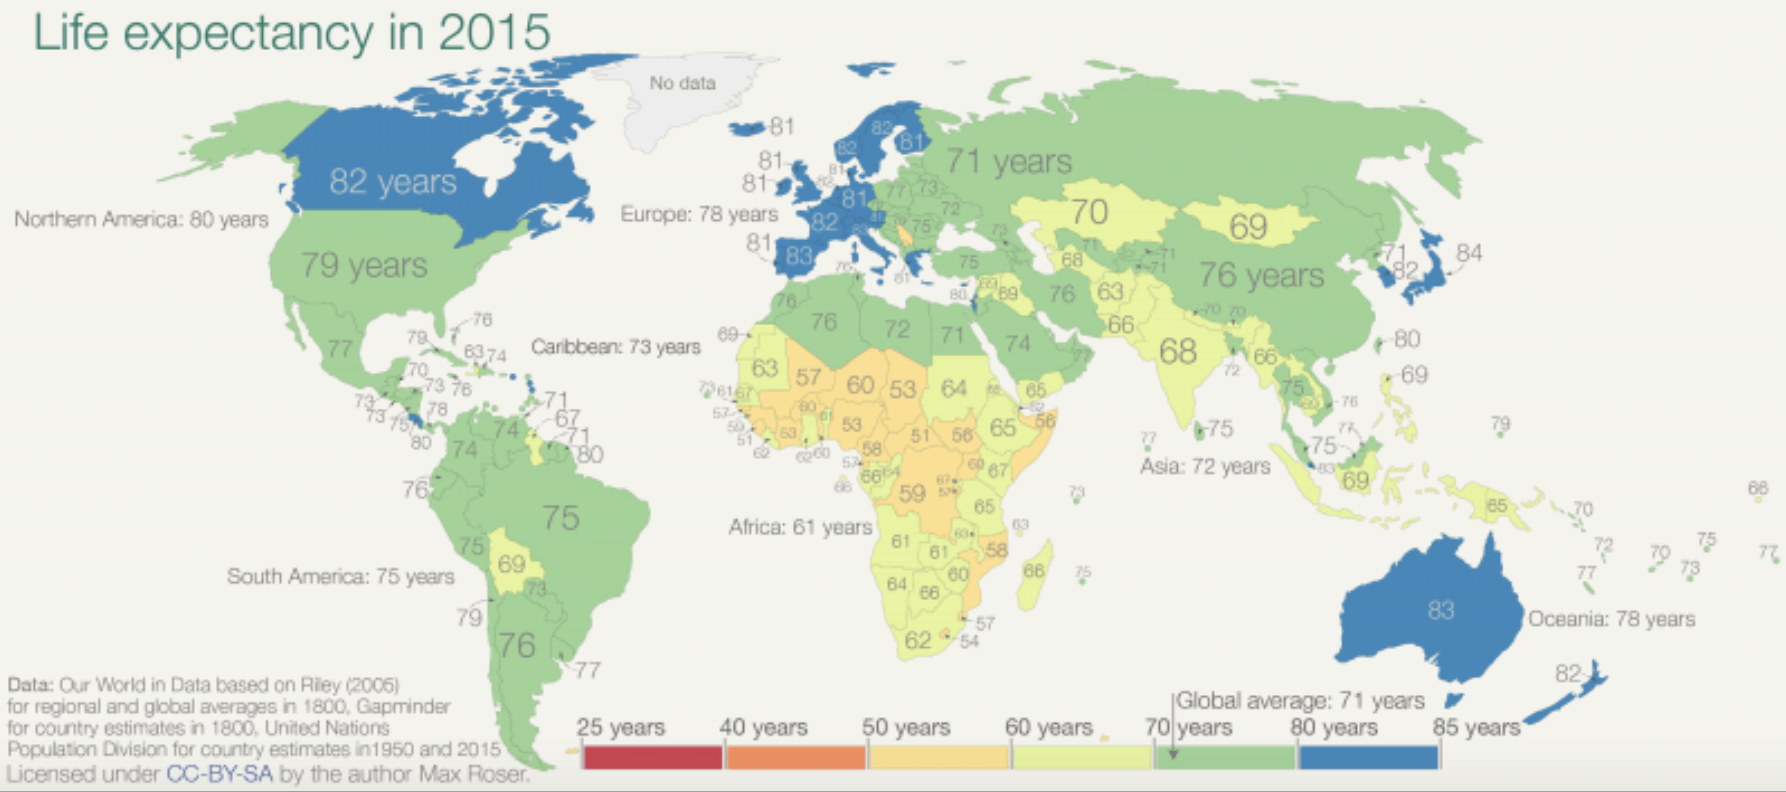 Life expectancy global map (2015)